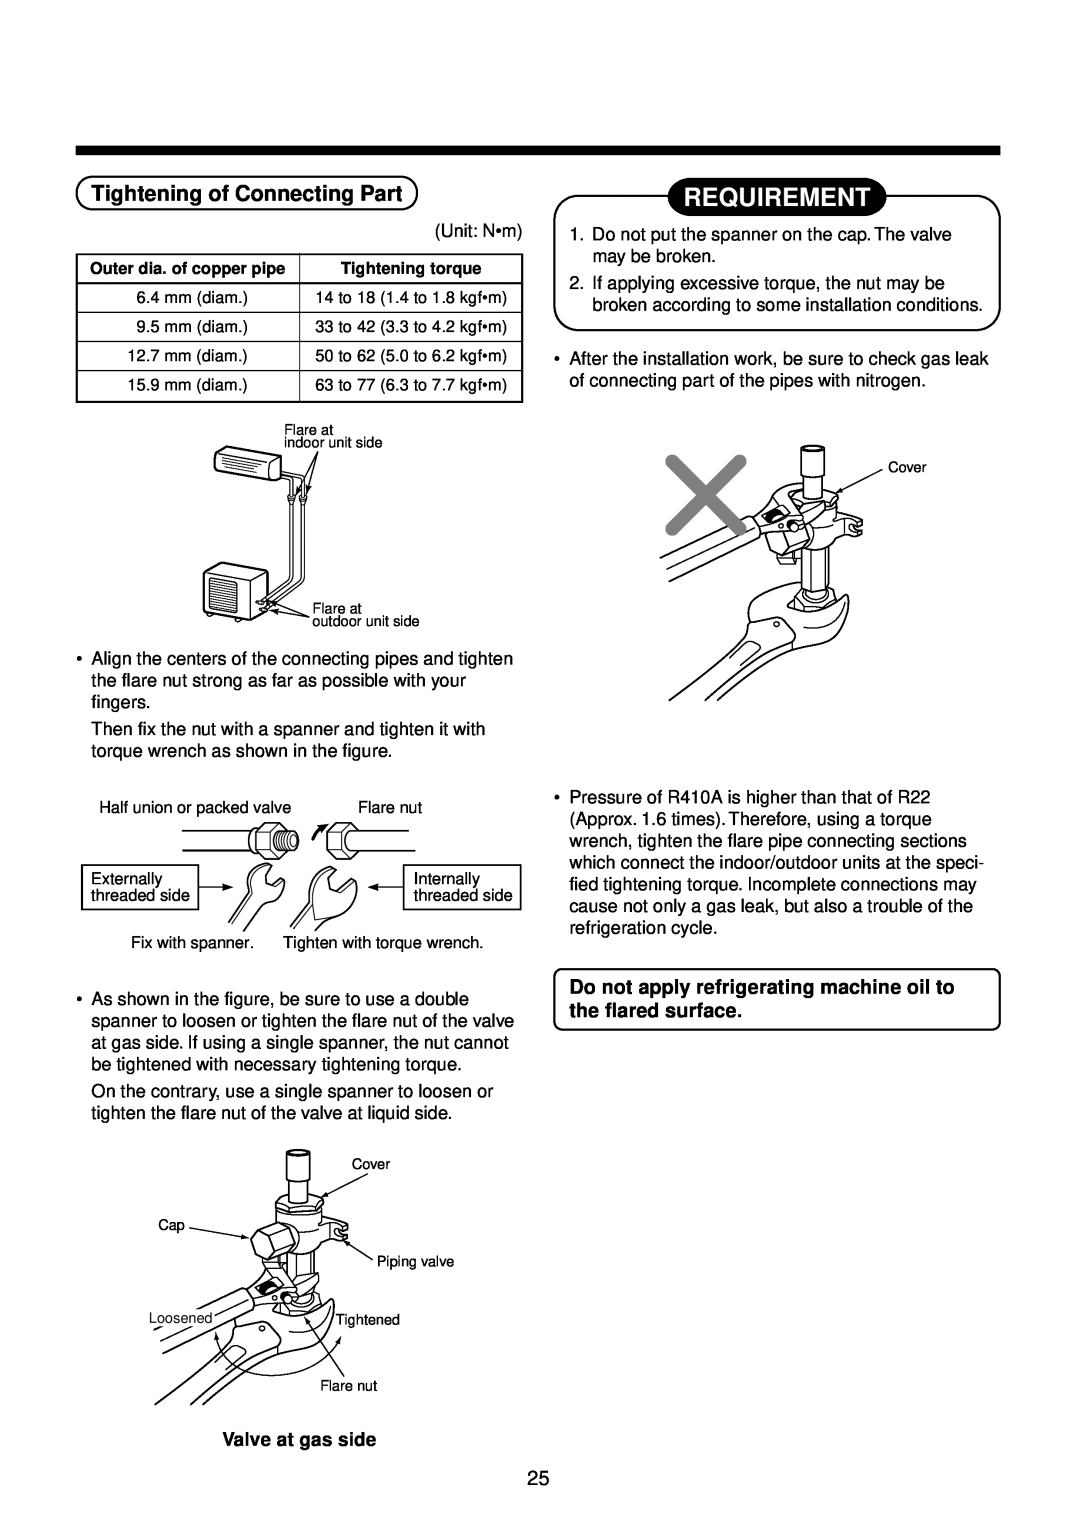 Toshiba R410A service manual Requirement, Tightening of Connecting Part, Valve at gas side 